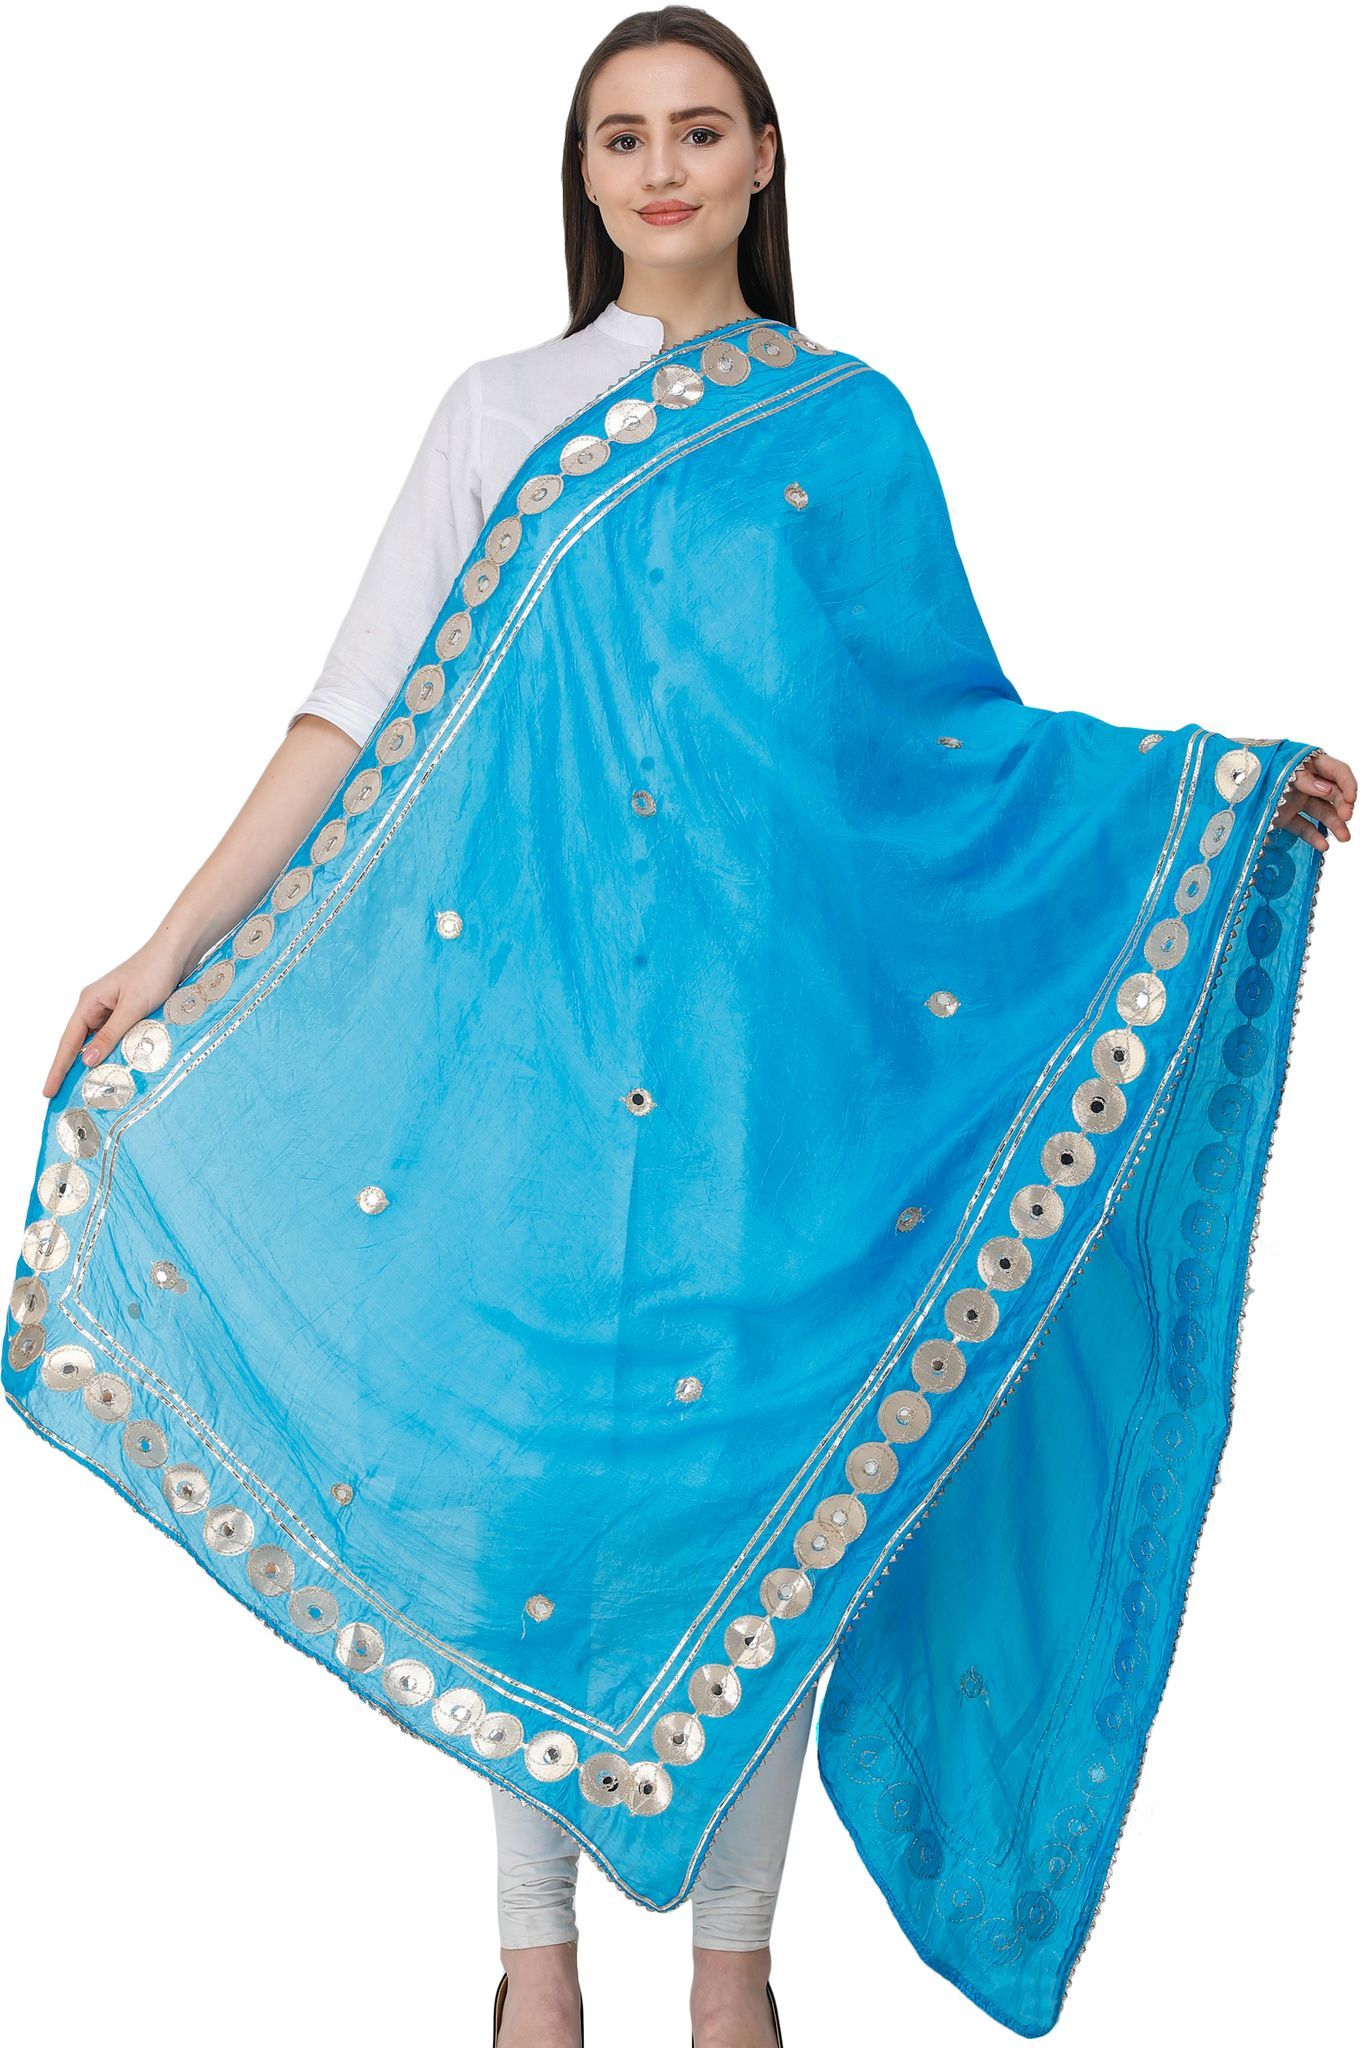 Vivid-Blue Dupatta from Amritsar Embellished with Patch Border